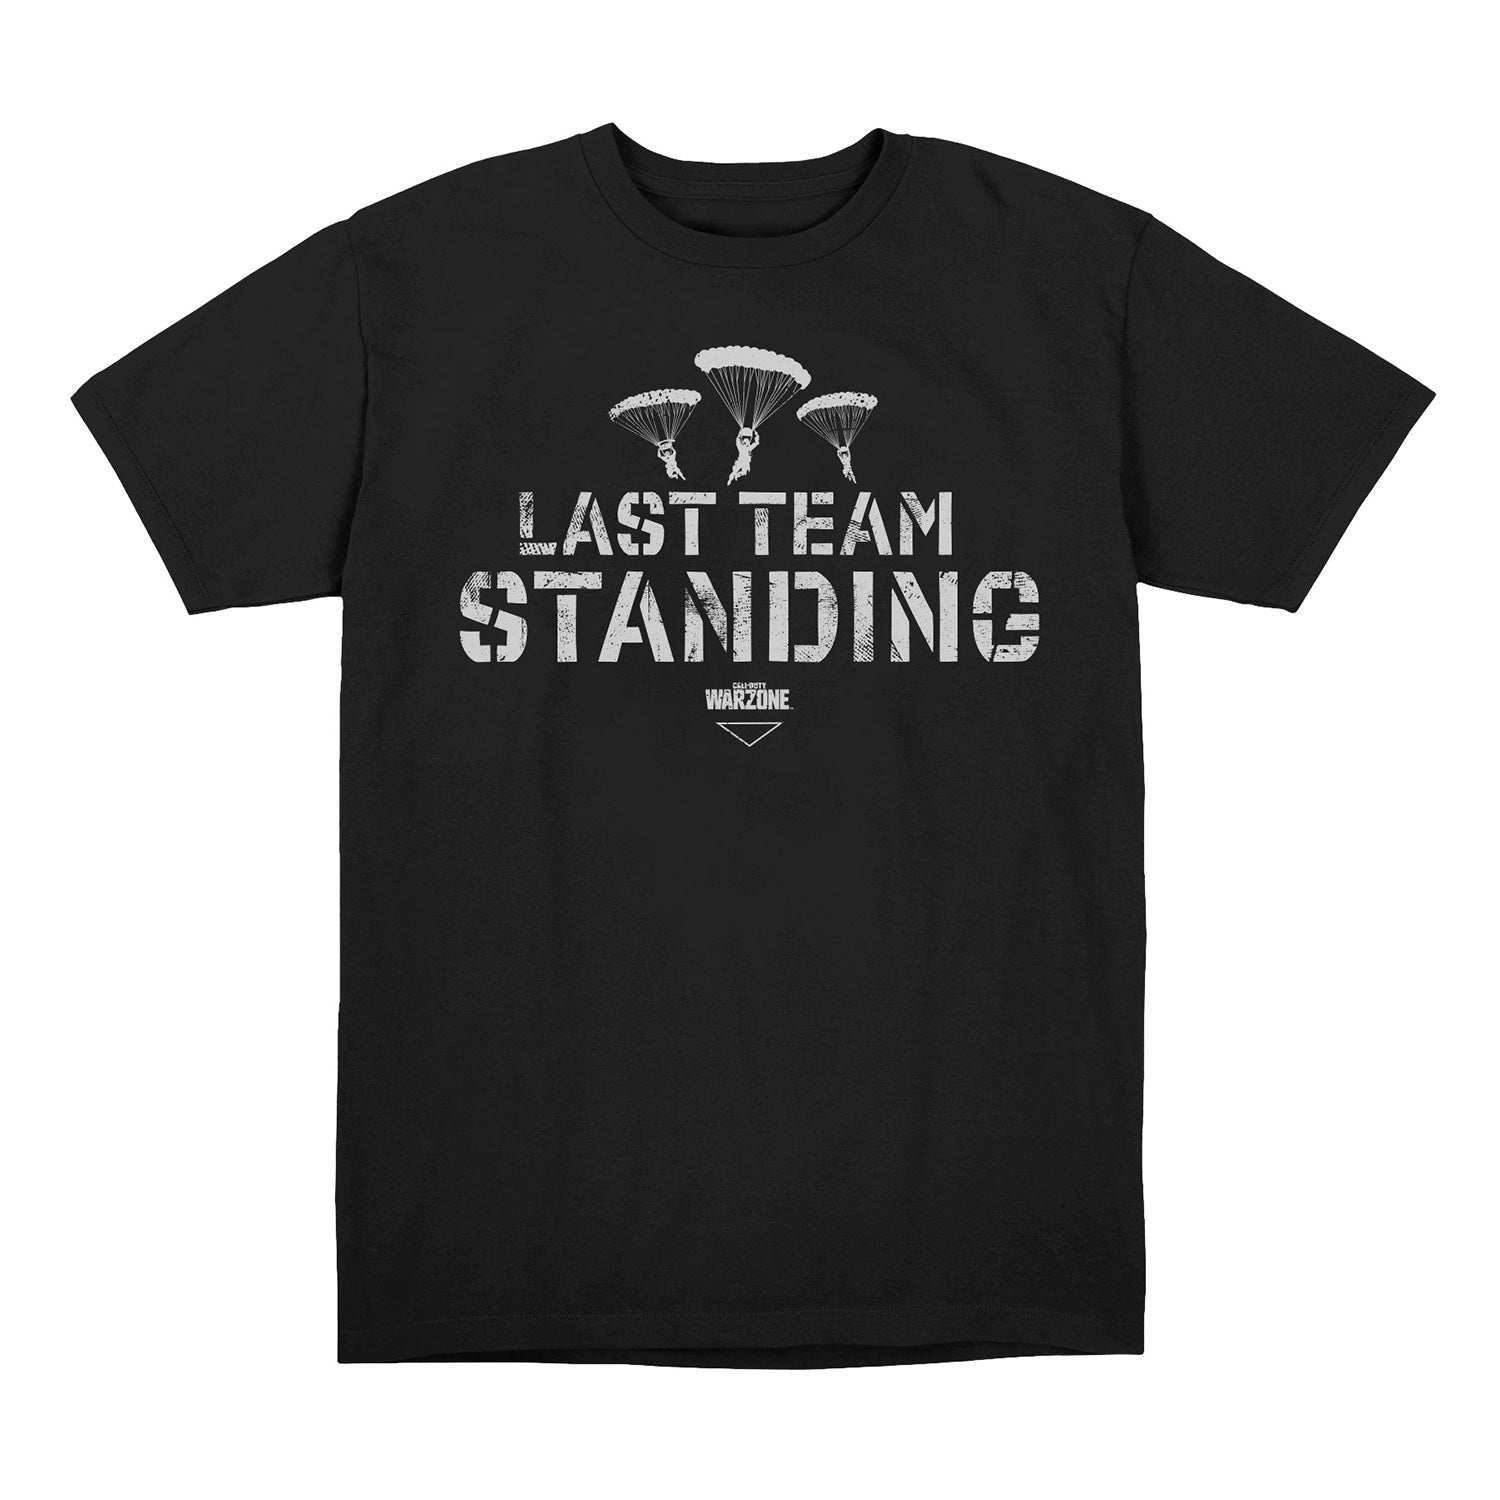 Call of Duty: Warzone Last Team Standing T-Shirt - Black Front View